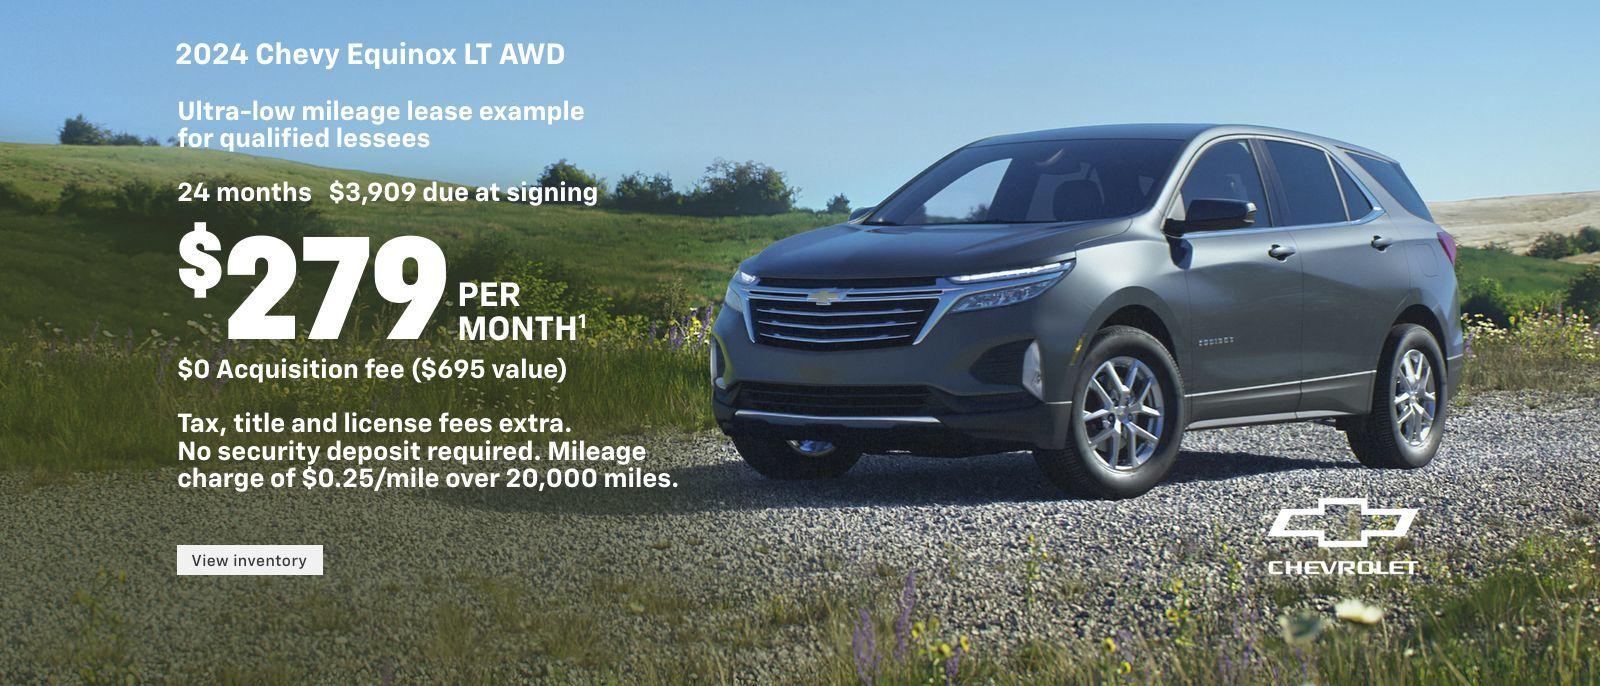 2024 Chevy Equinox LT AWD. Ultra-low mileage lease example for qualified lessees. $279 per month. 24 months. $3,909 due at signing. $0 Acquisition fee ($695 value). Tax, title and license fees extra. No security deposit required. Mileage charge of $0.25/mile over 20,000 miles.